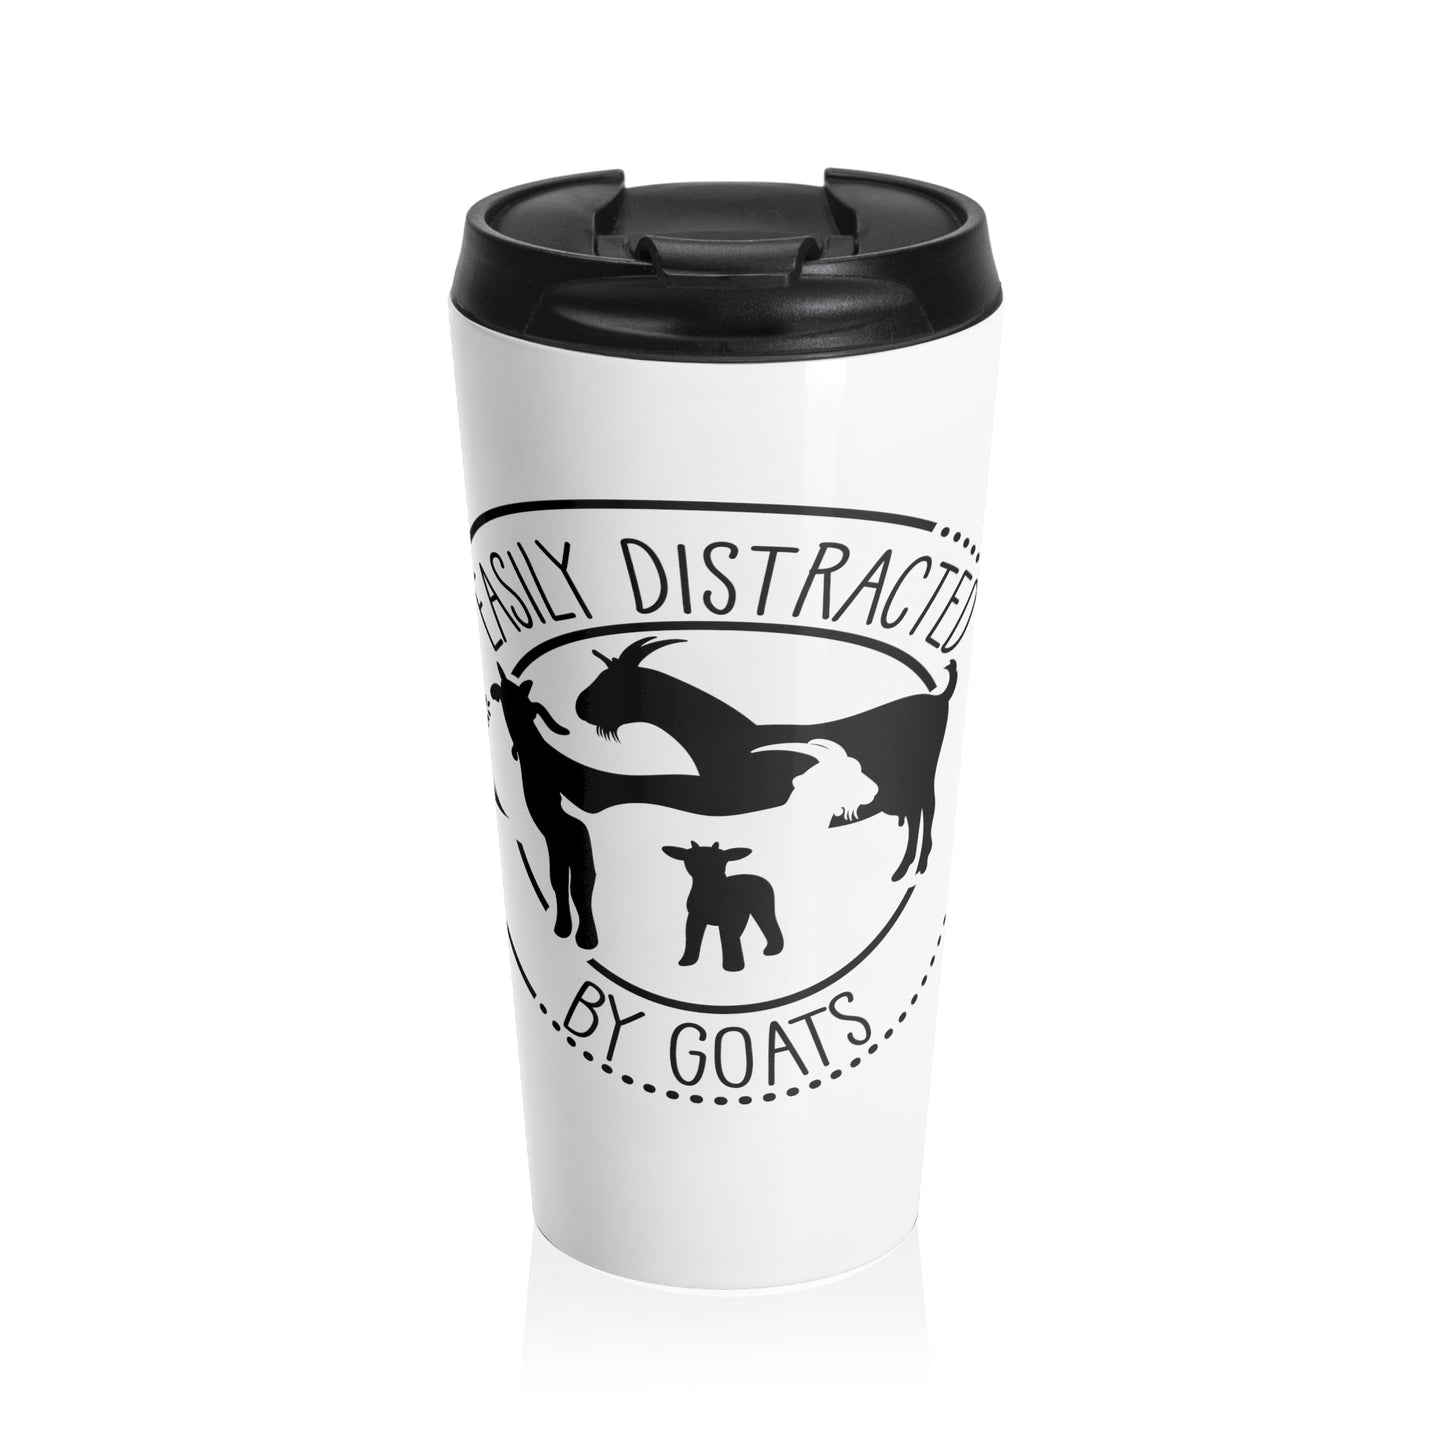 Distracted By Goats Travel Mug